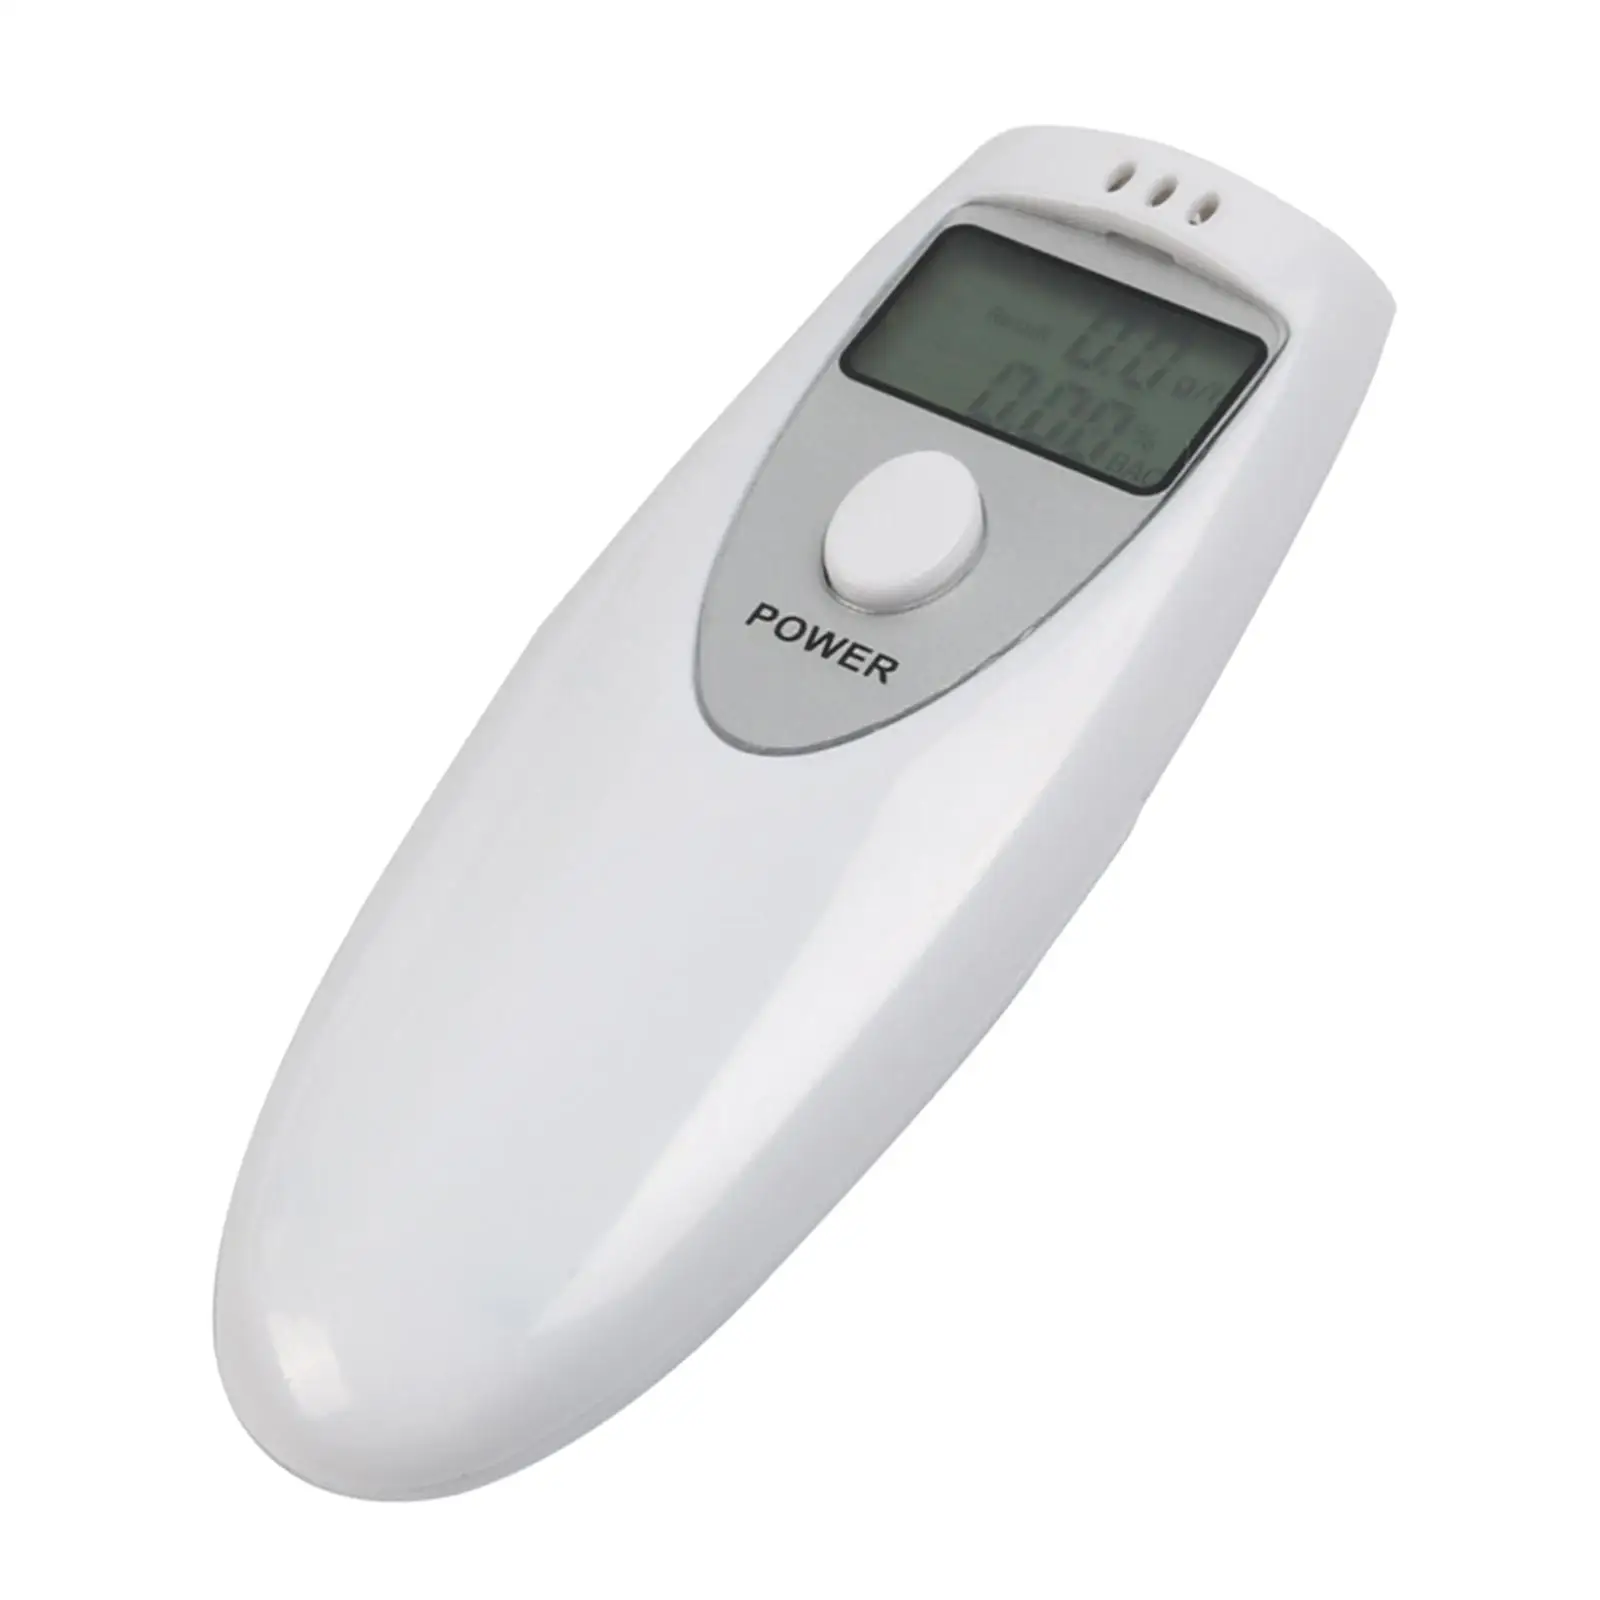 Mini Alcohol Testing Tool Breathalyzer Breath Checker , Just Need YOU Press The Switch